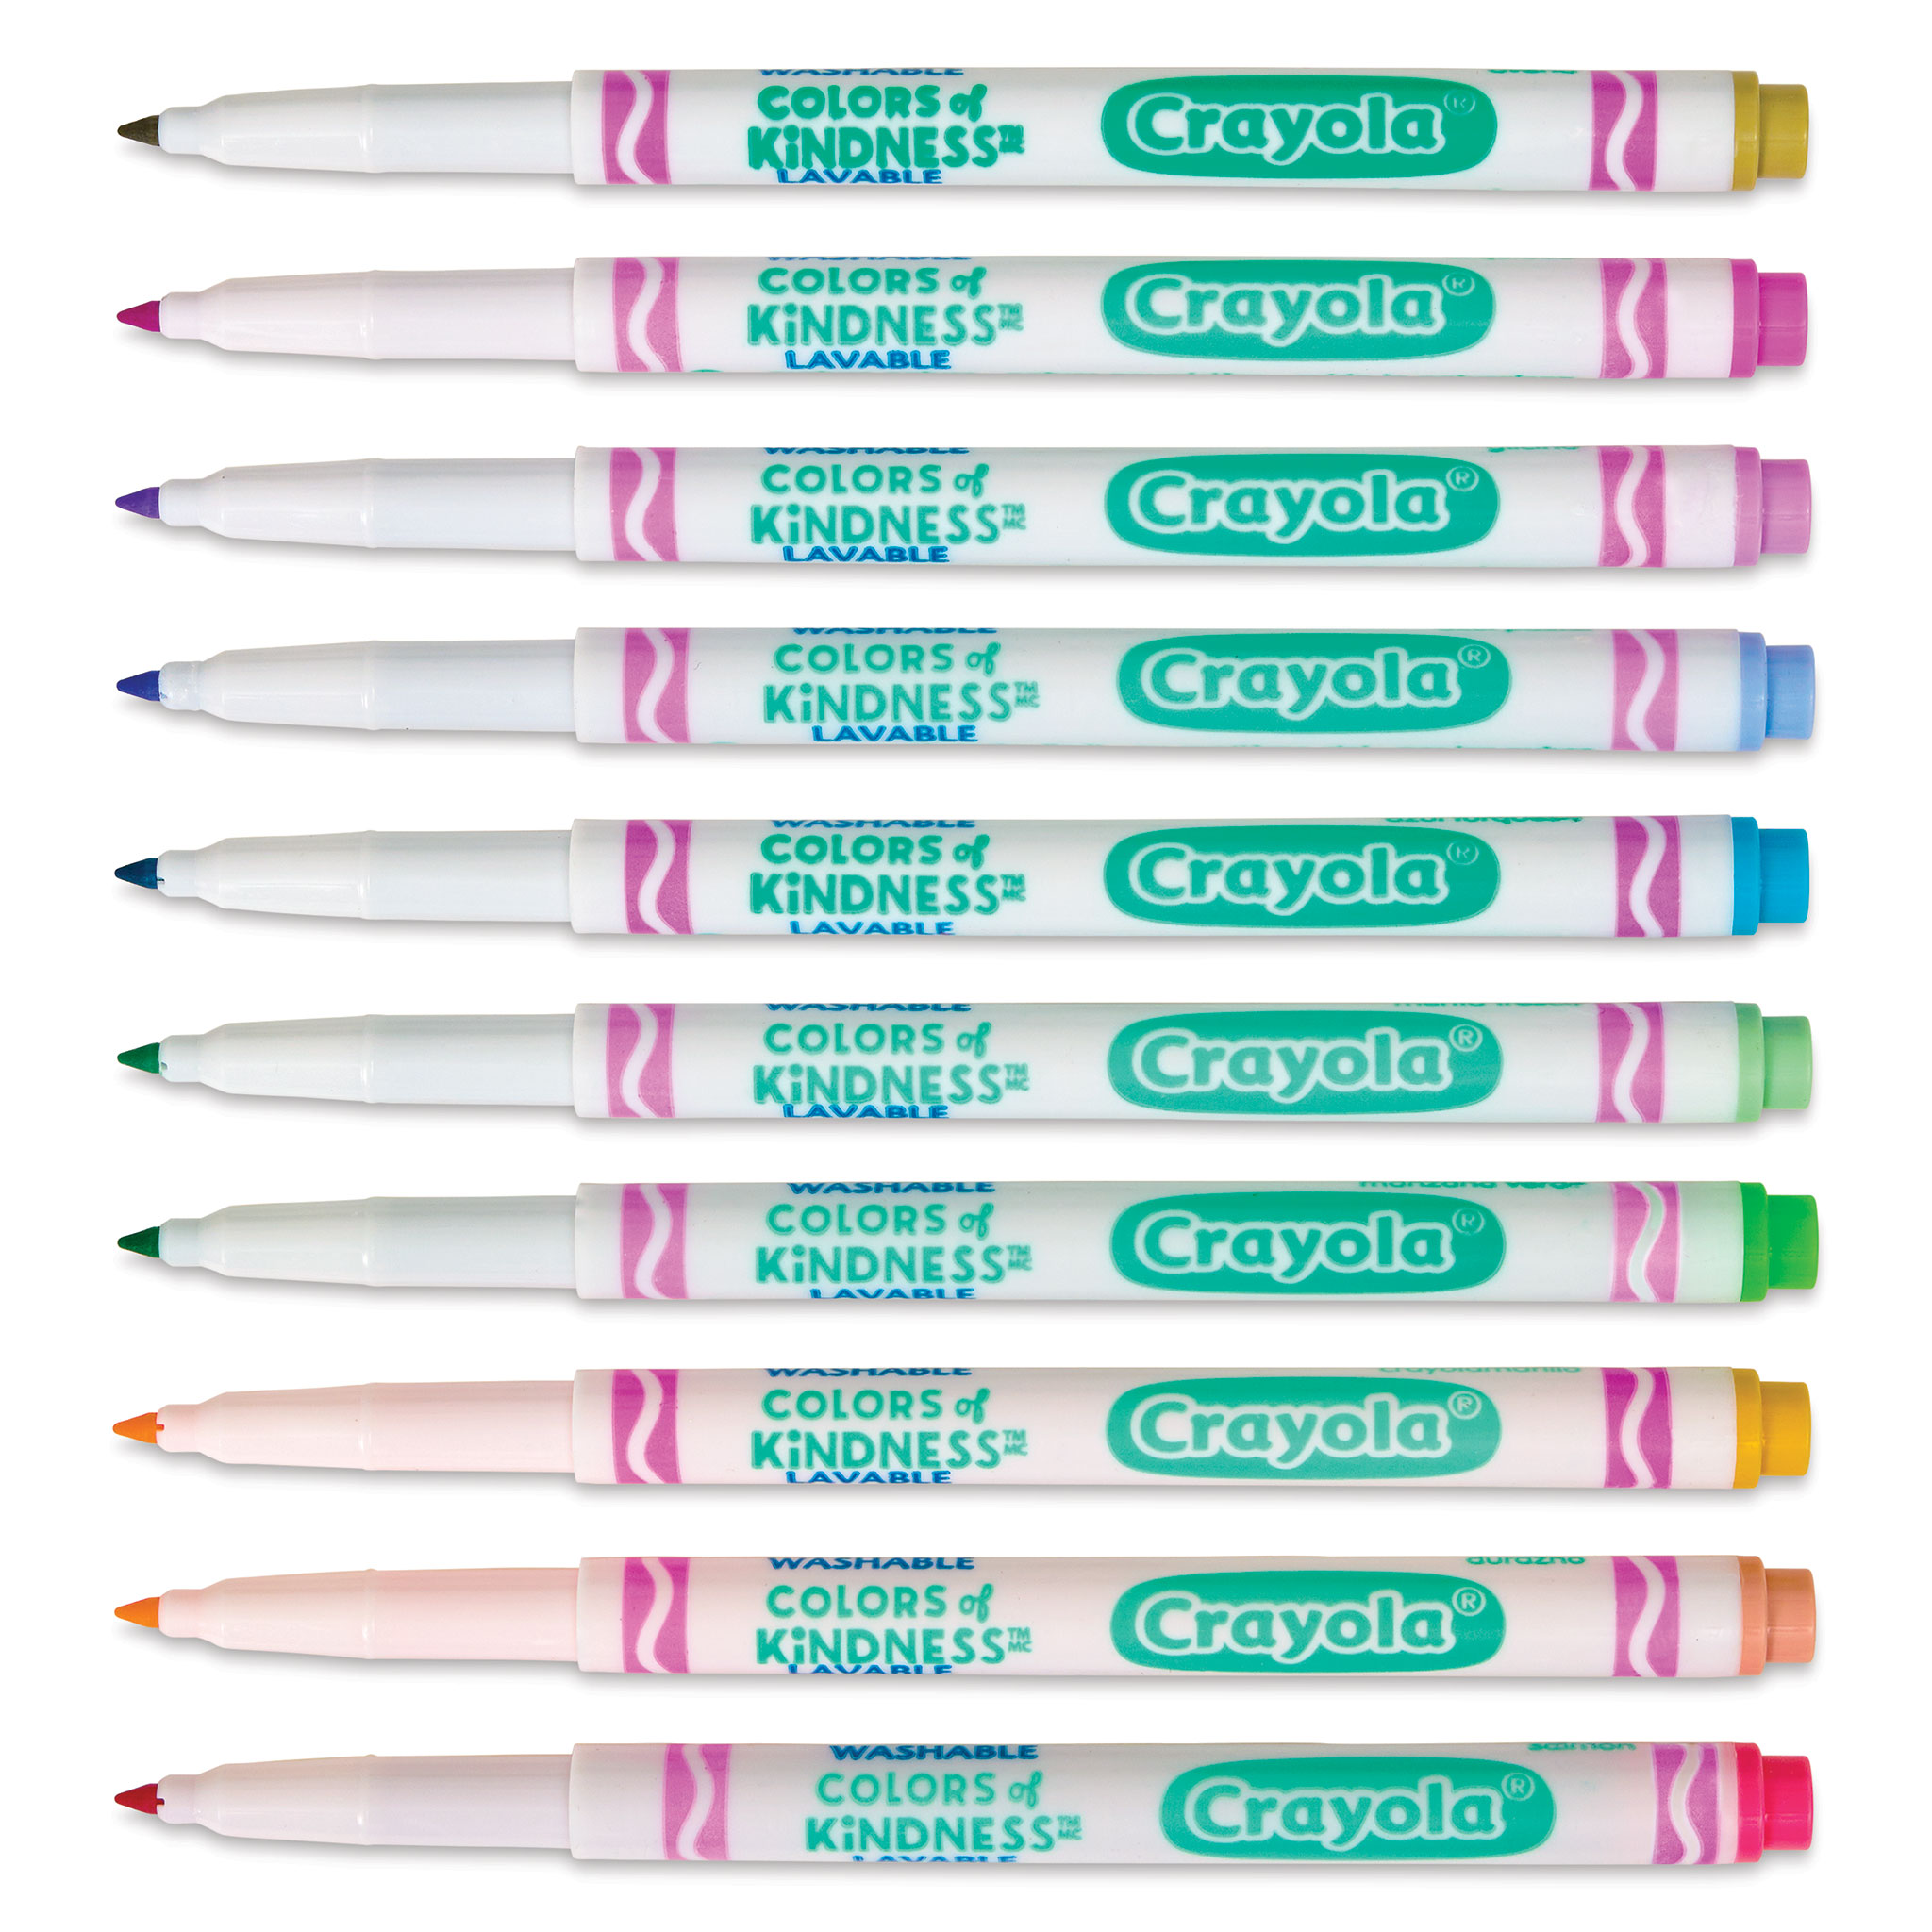 Crayola Ultra-Clean Washable Marker Set - Classic Colors, Broad Tip, Set of  8